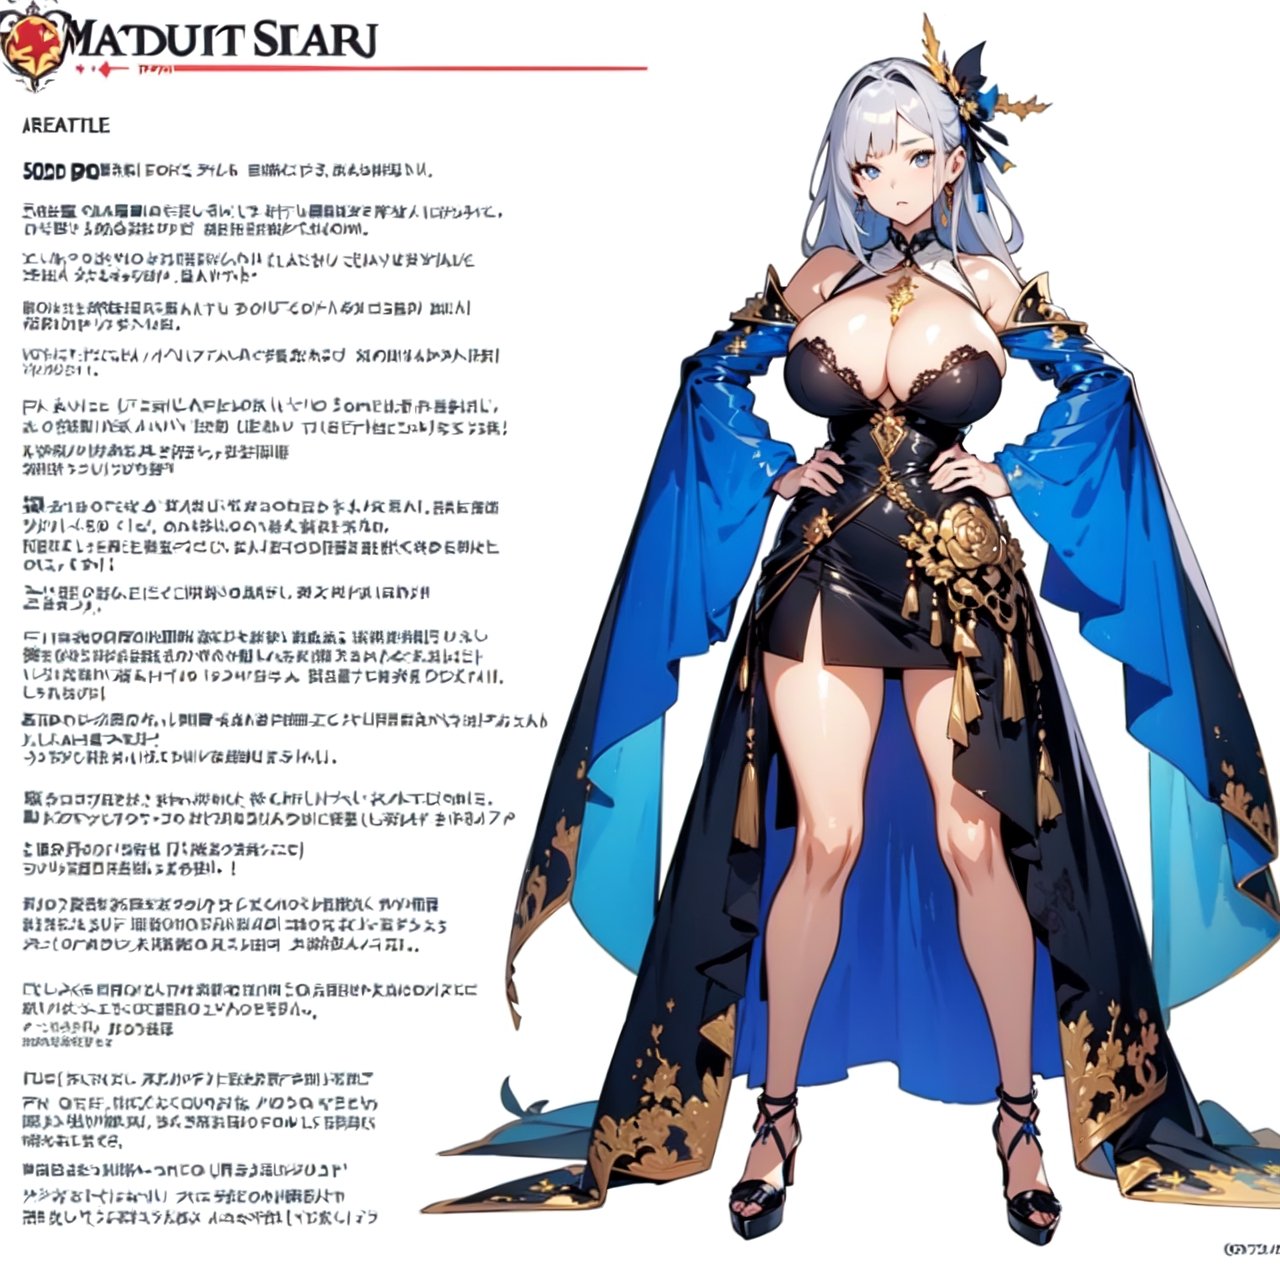 1 girl, anime, design, custom character, character design, full body, modelsheet, big boobies, big breast, huge breasts(CharacterSheet:1)(masterpiece, top quality, best quality, official art, beautiful and aesthetic:1.2), extreme detailed,(fractal art:1.3),highest detailed, miniskirt, gothic lolita, cleavage dress, bare shoulders,YAMATO,